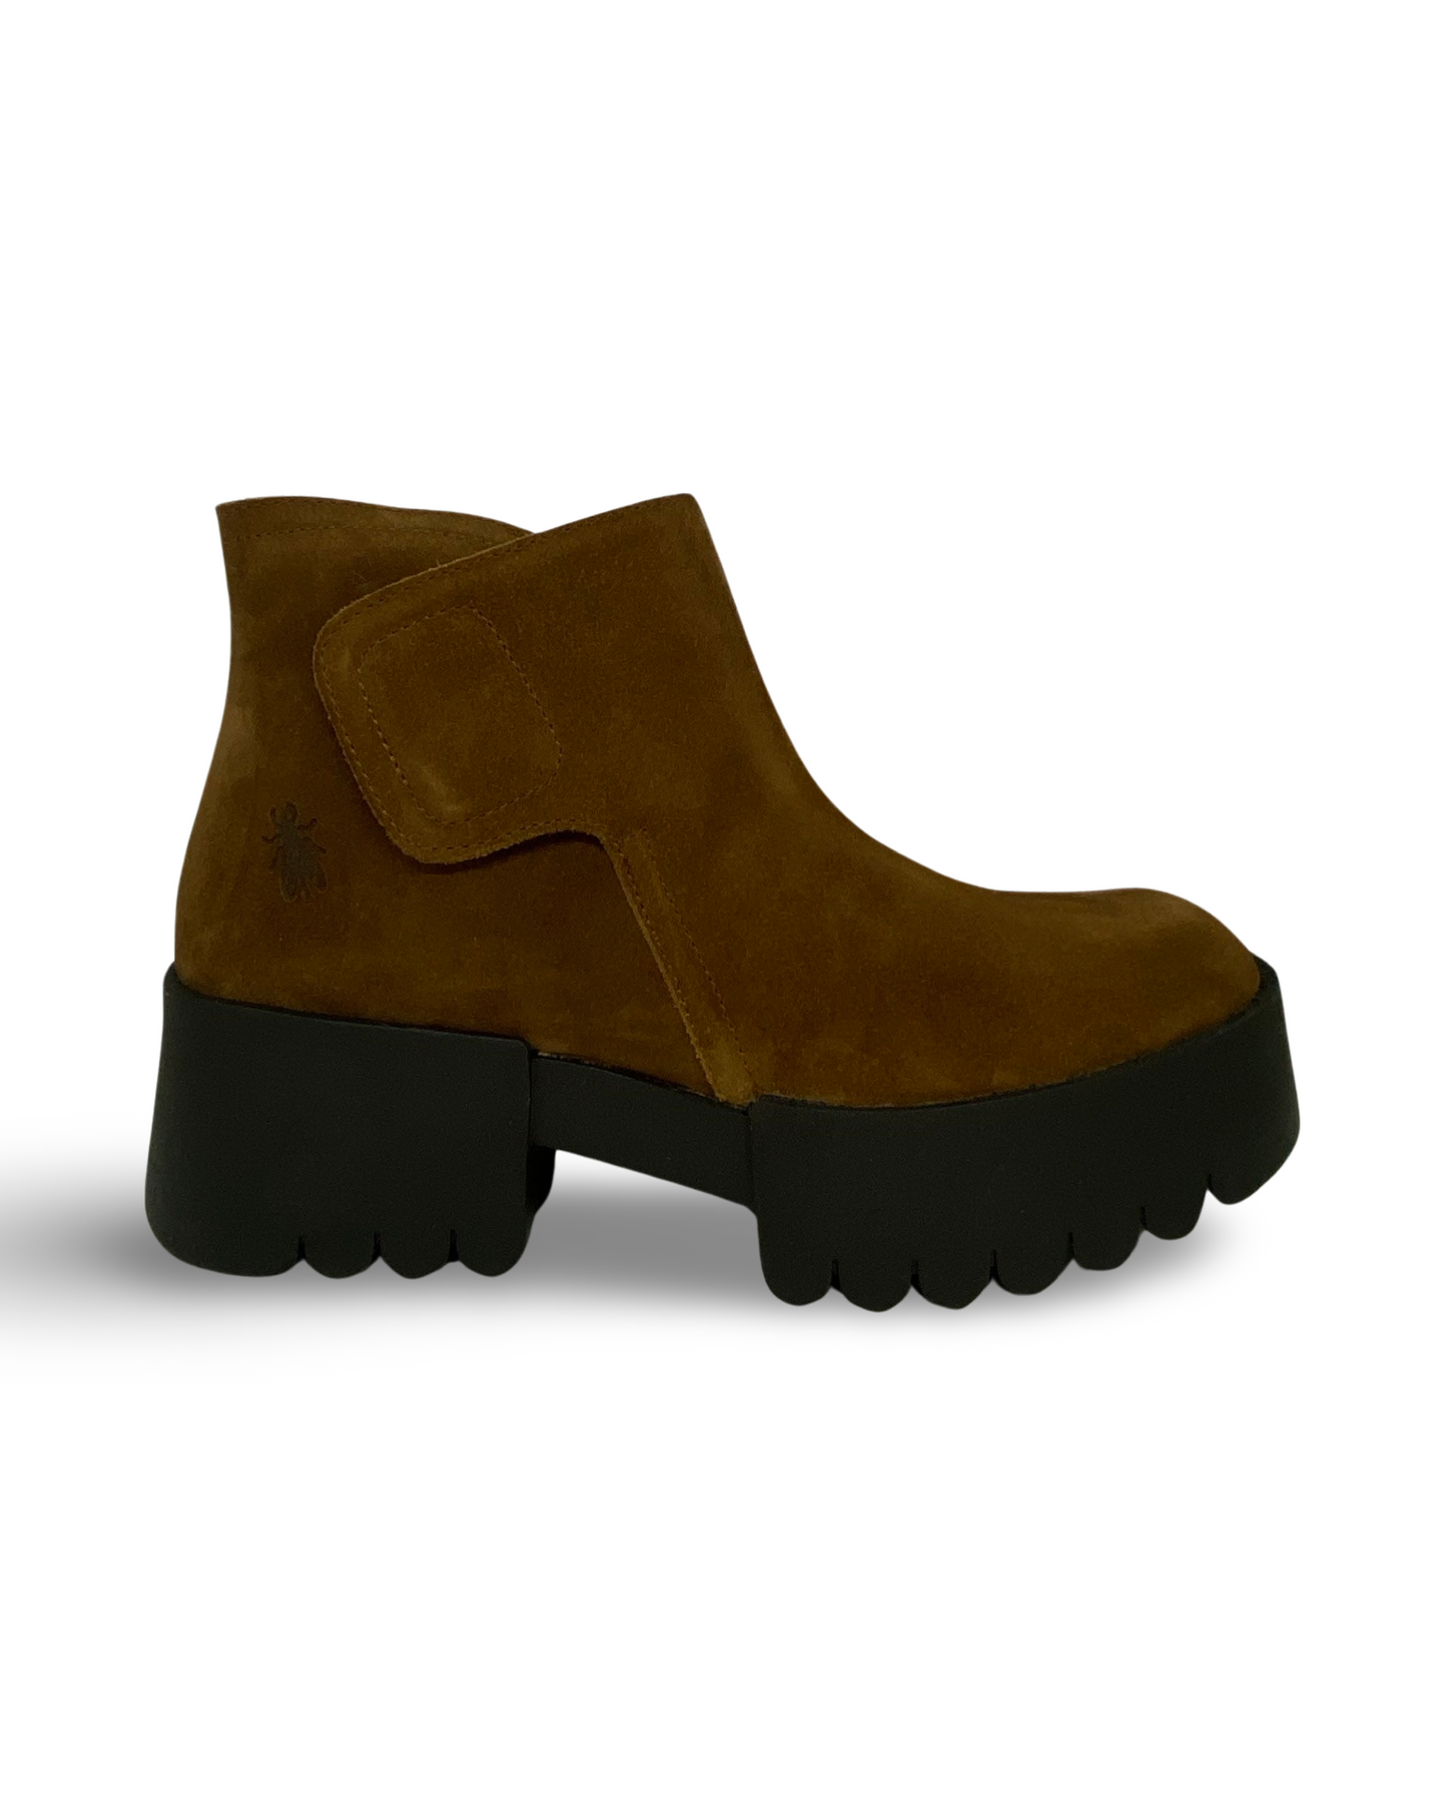 Endo Boot By Fly London - Camel